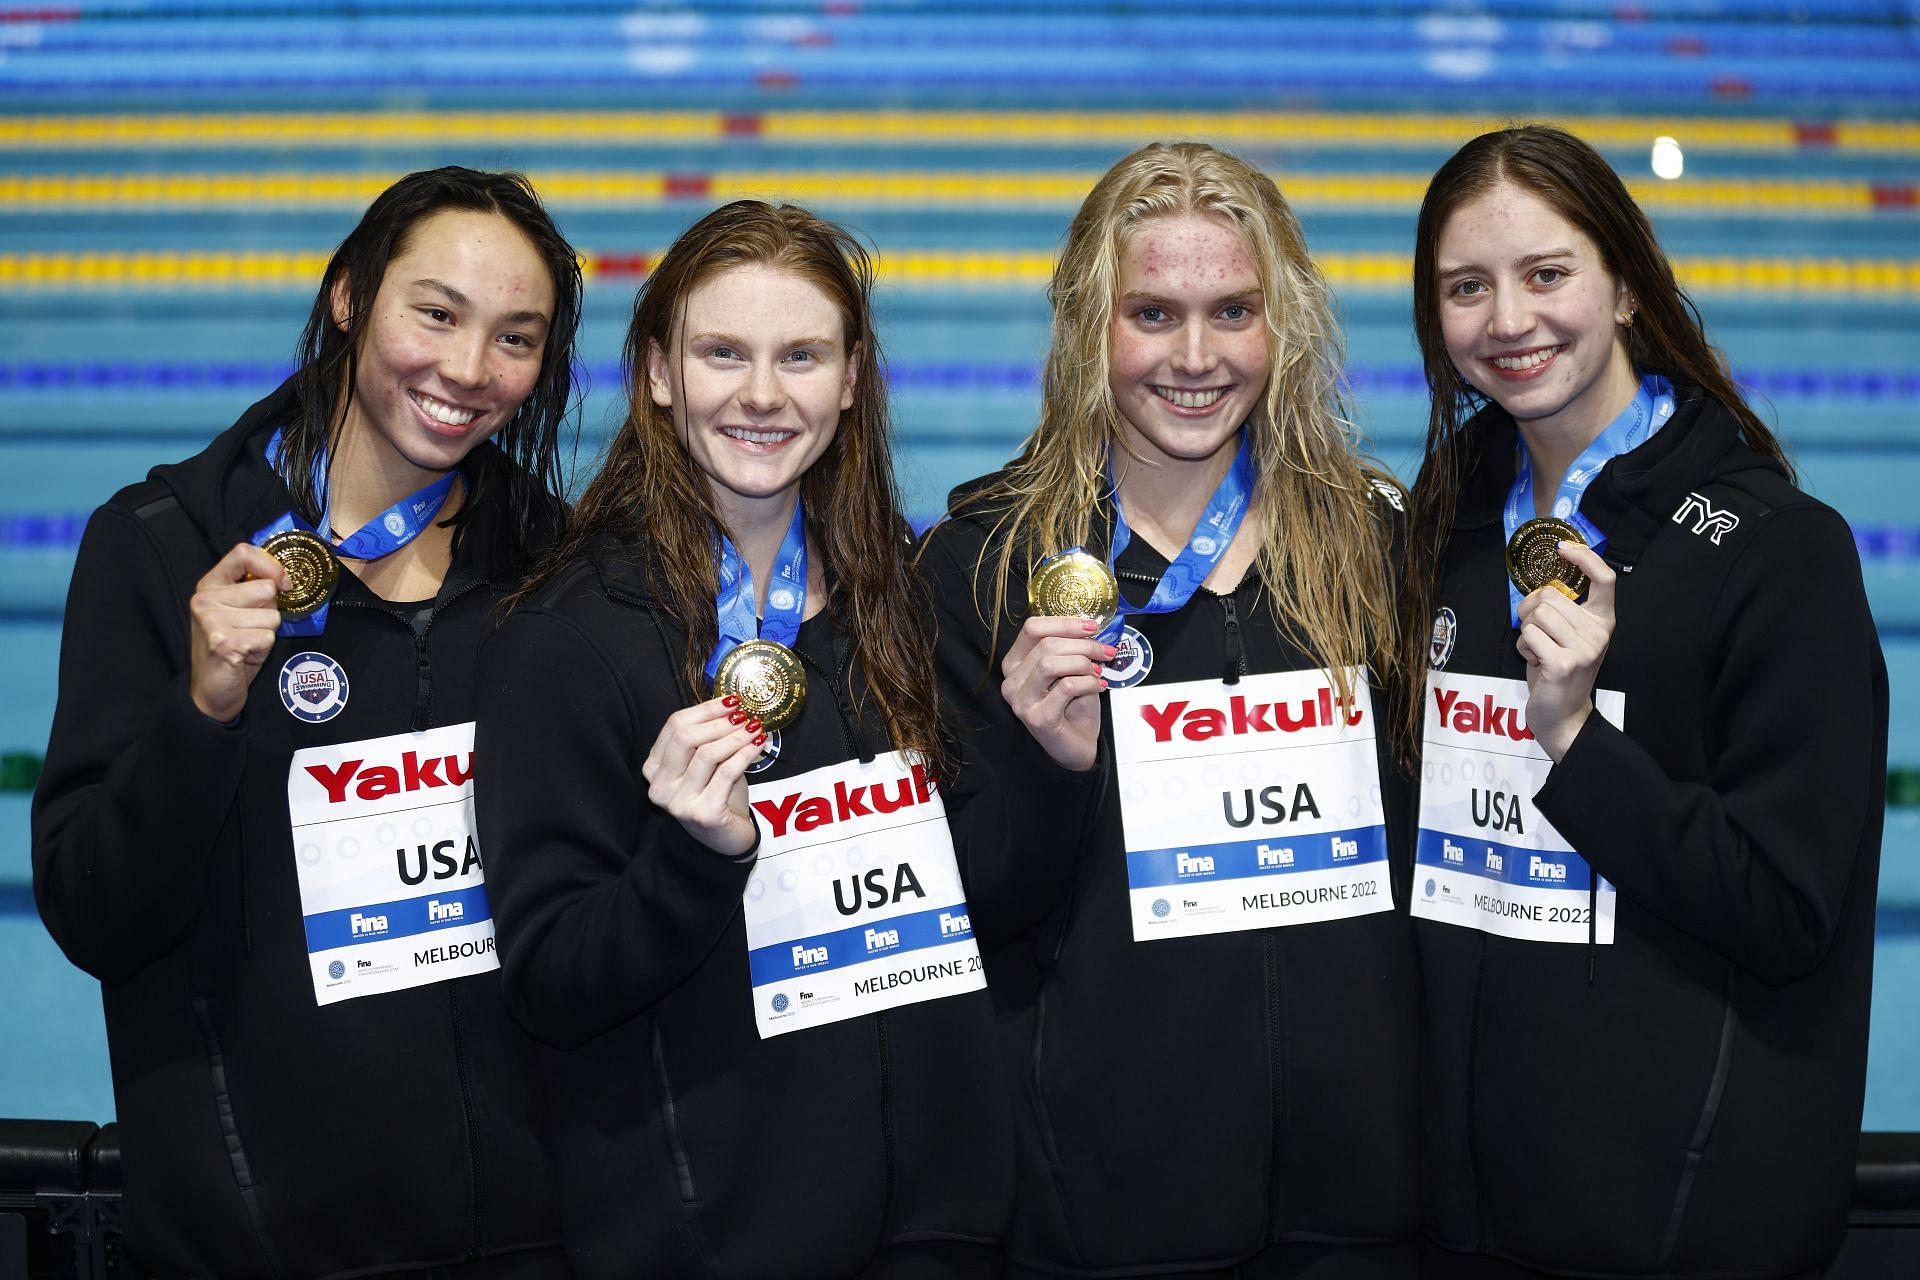 Gold medallists Torri Huske, Claire Curzan, Erika Brown, and Kate Douglass of the United States on day 3 of the 2022 FINA World Short Course Swimming Championships